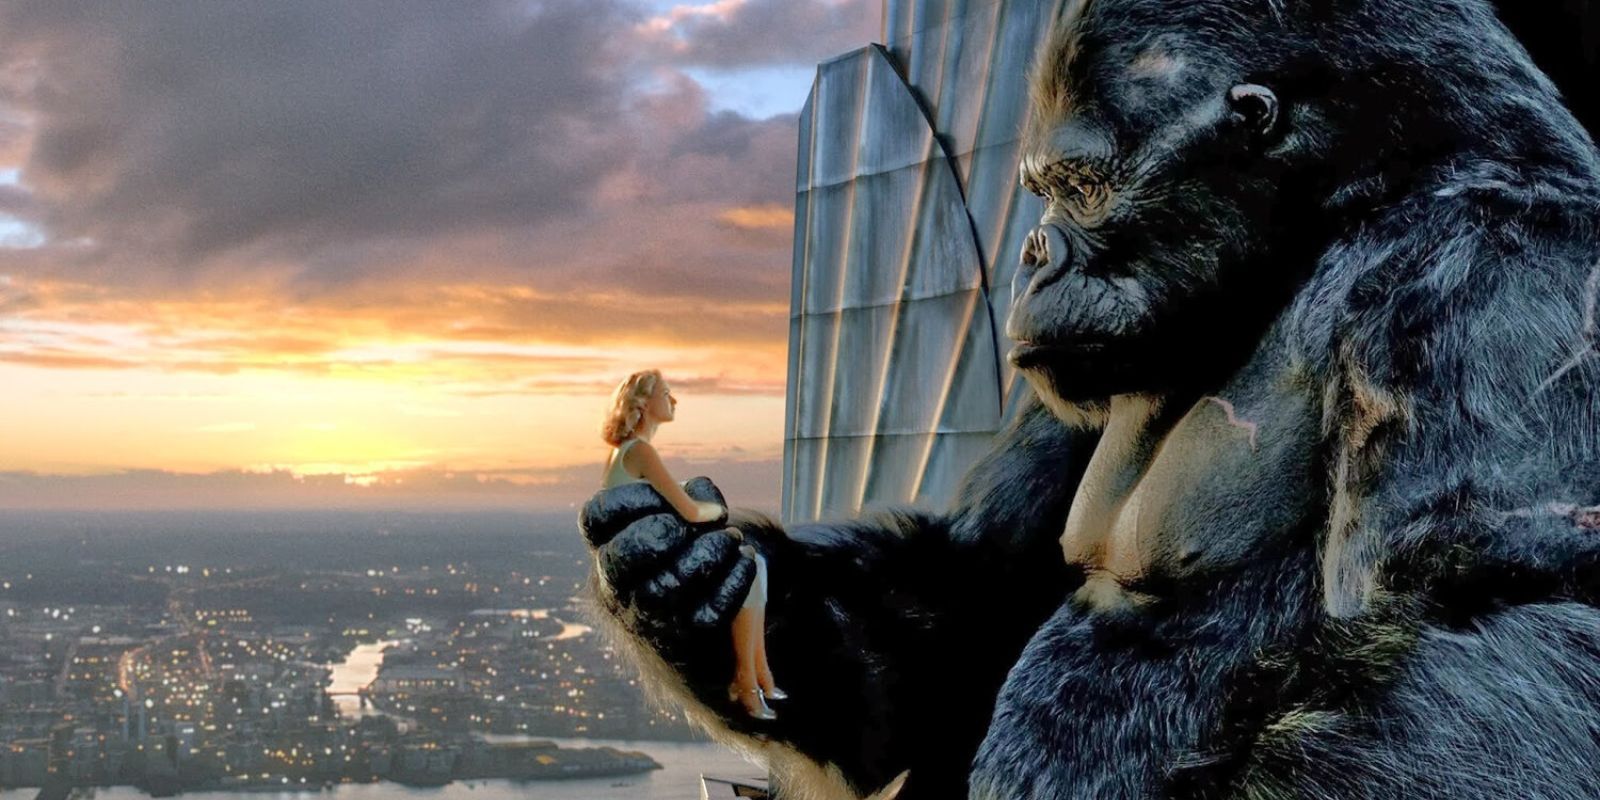 A woman is held in the hand of a giant ape atop a building